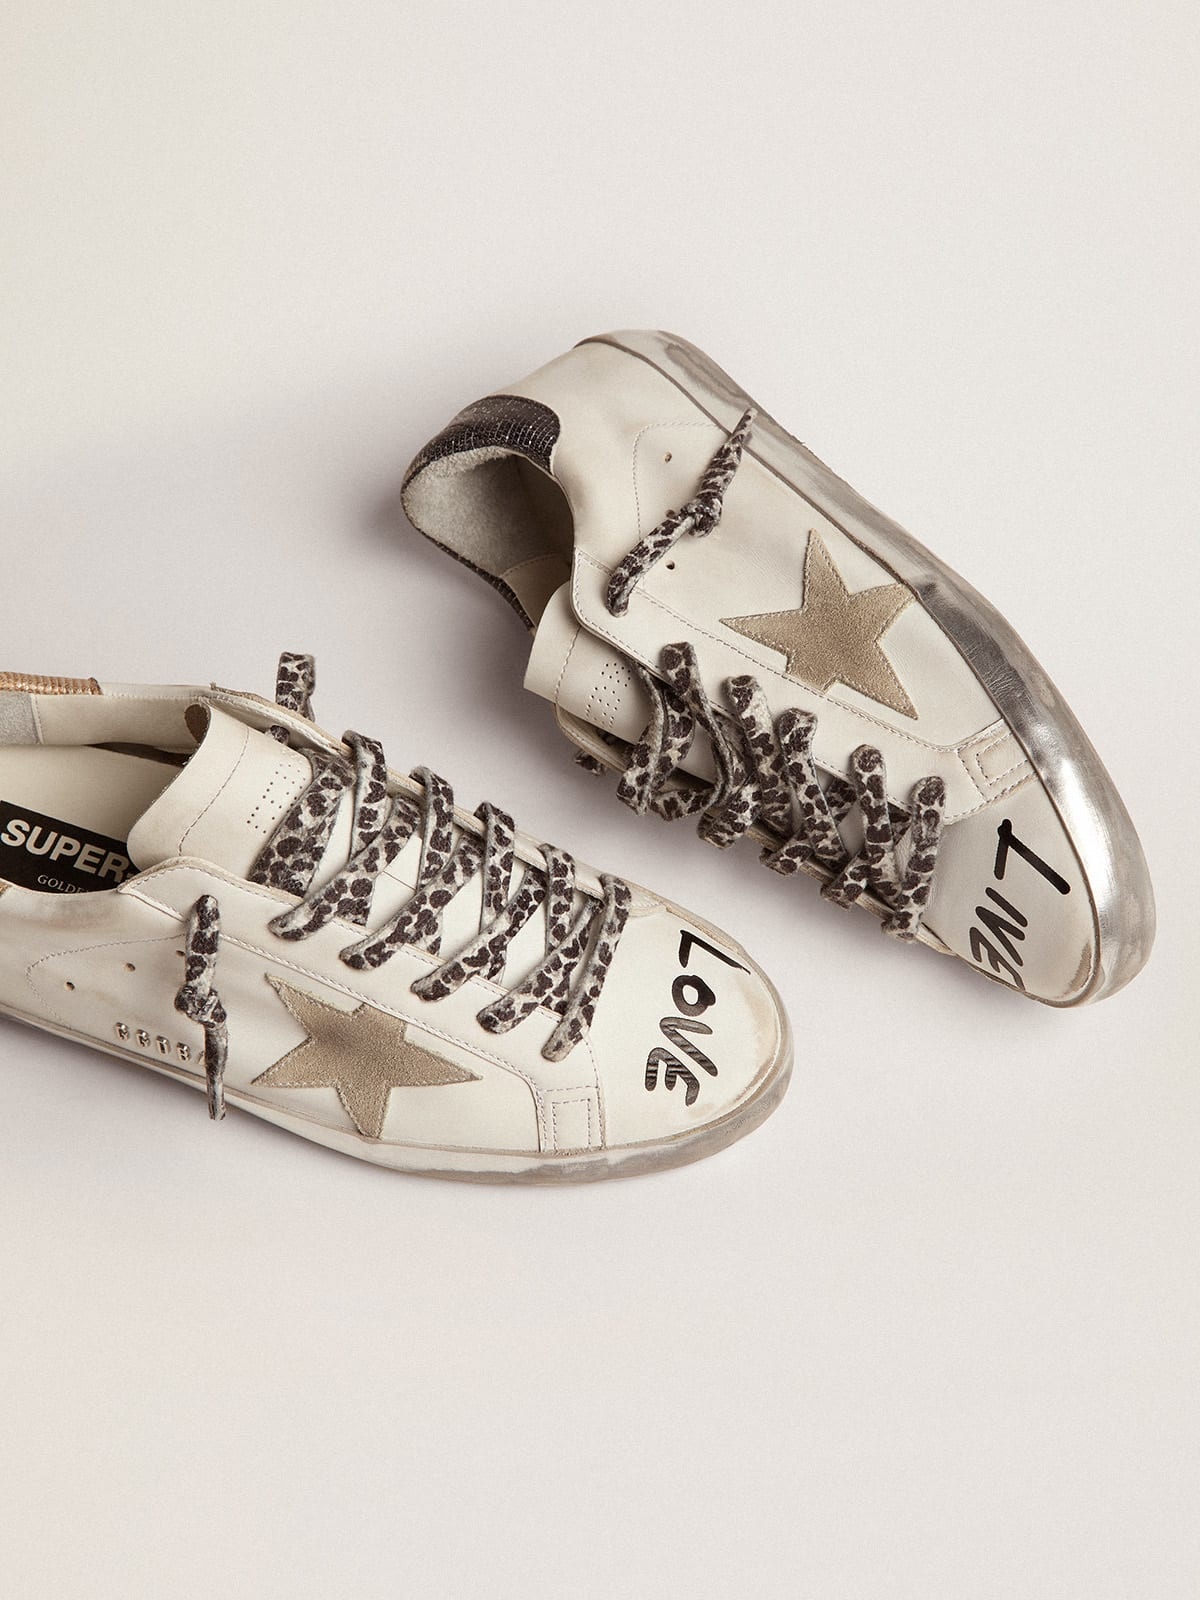 Super-Star sneakers in white leather with ice-gray suede star and contrasting black lettering - 2